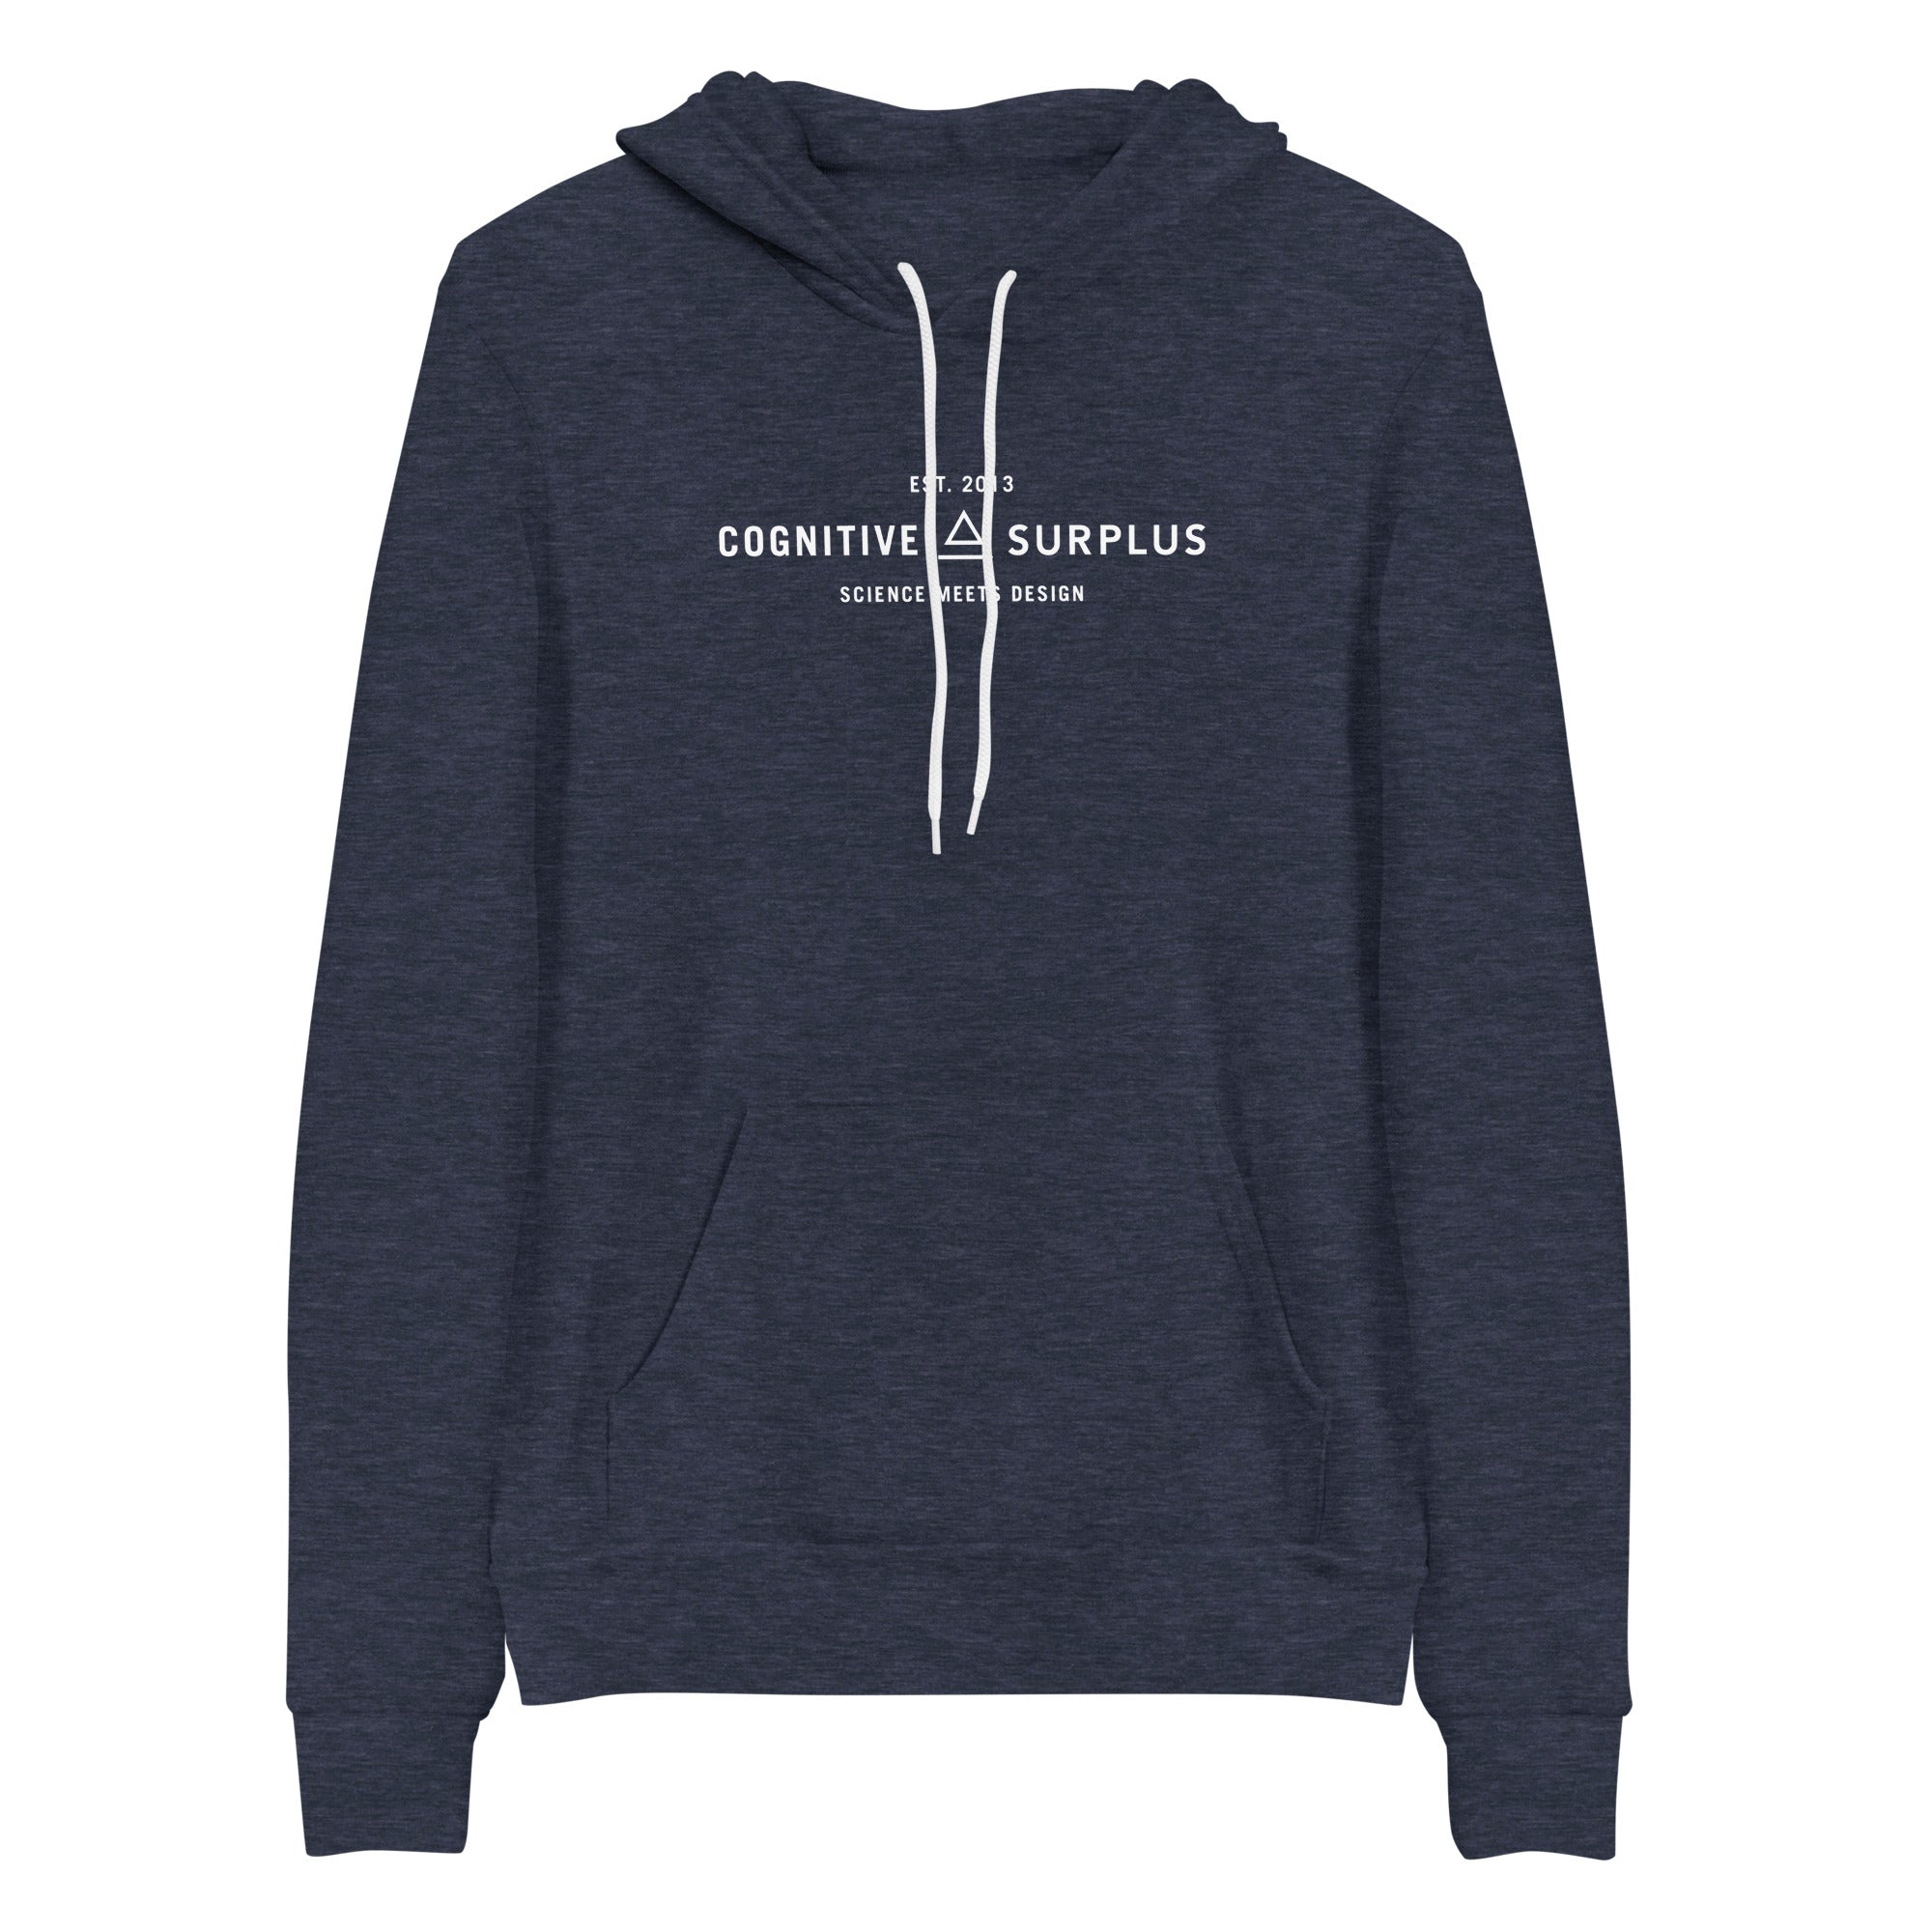 unisex-pullover-hoodie-heather-navy-front-654abe0d8f12a.jpg